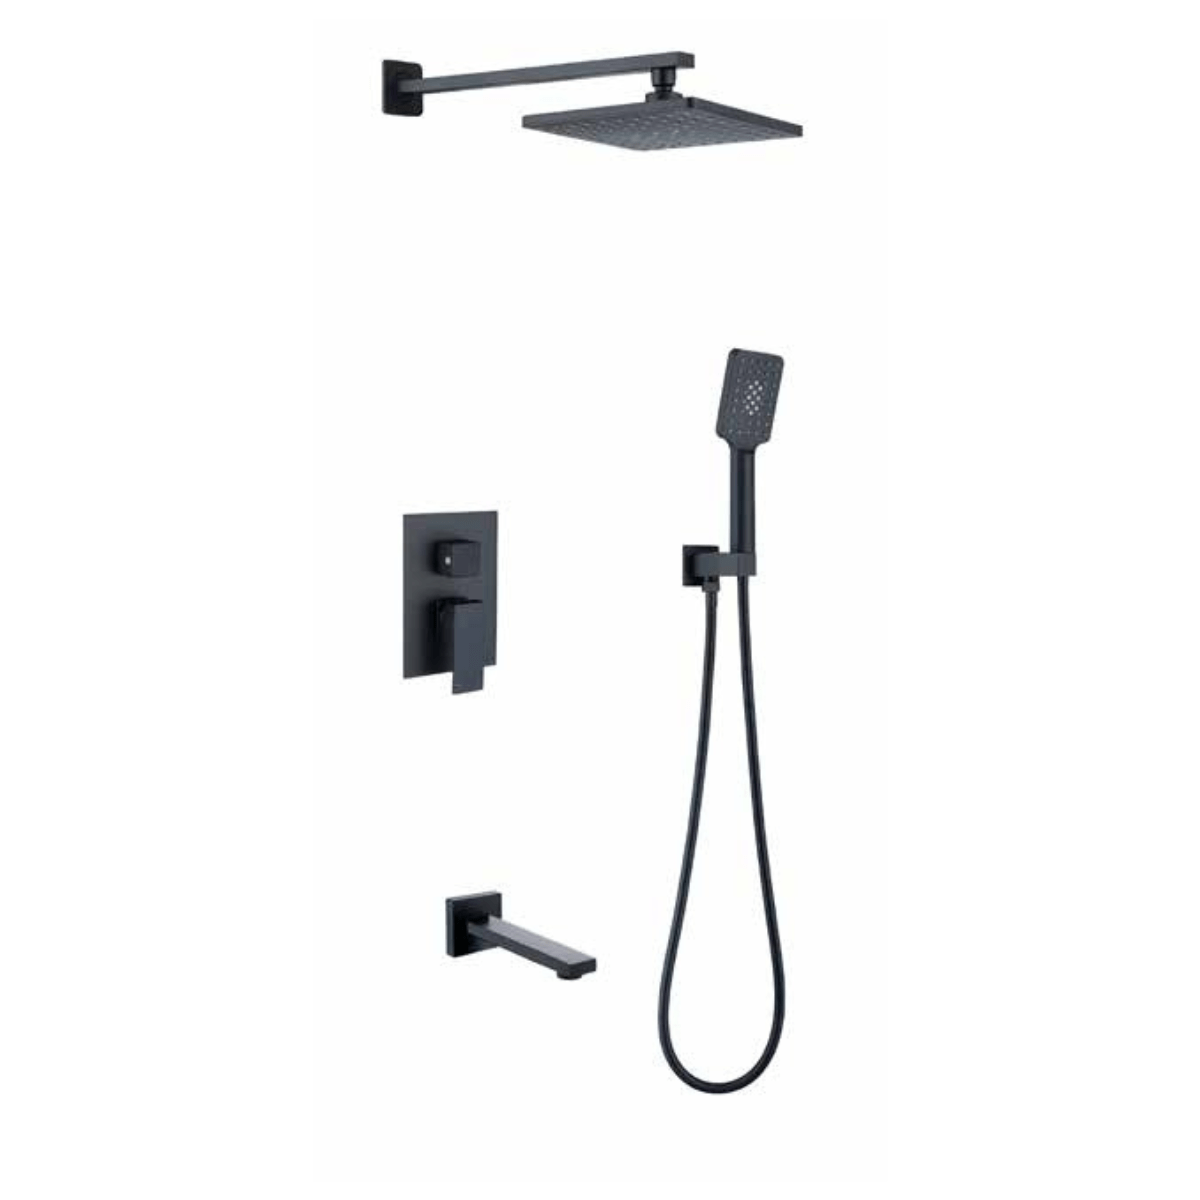 Buy Bathroom Black Concealed Wall Mounted Three-Function Square Overhead Rain Shower Set - WK-K-8417H | Shop at Supply Master Accra, Ghana Shower Set Buy Tools hardware Building materials